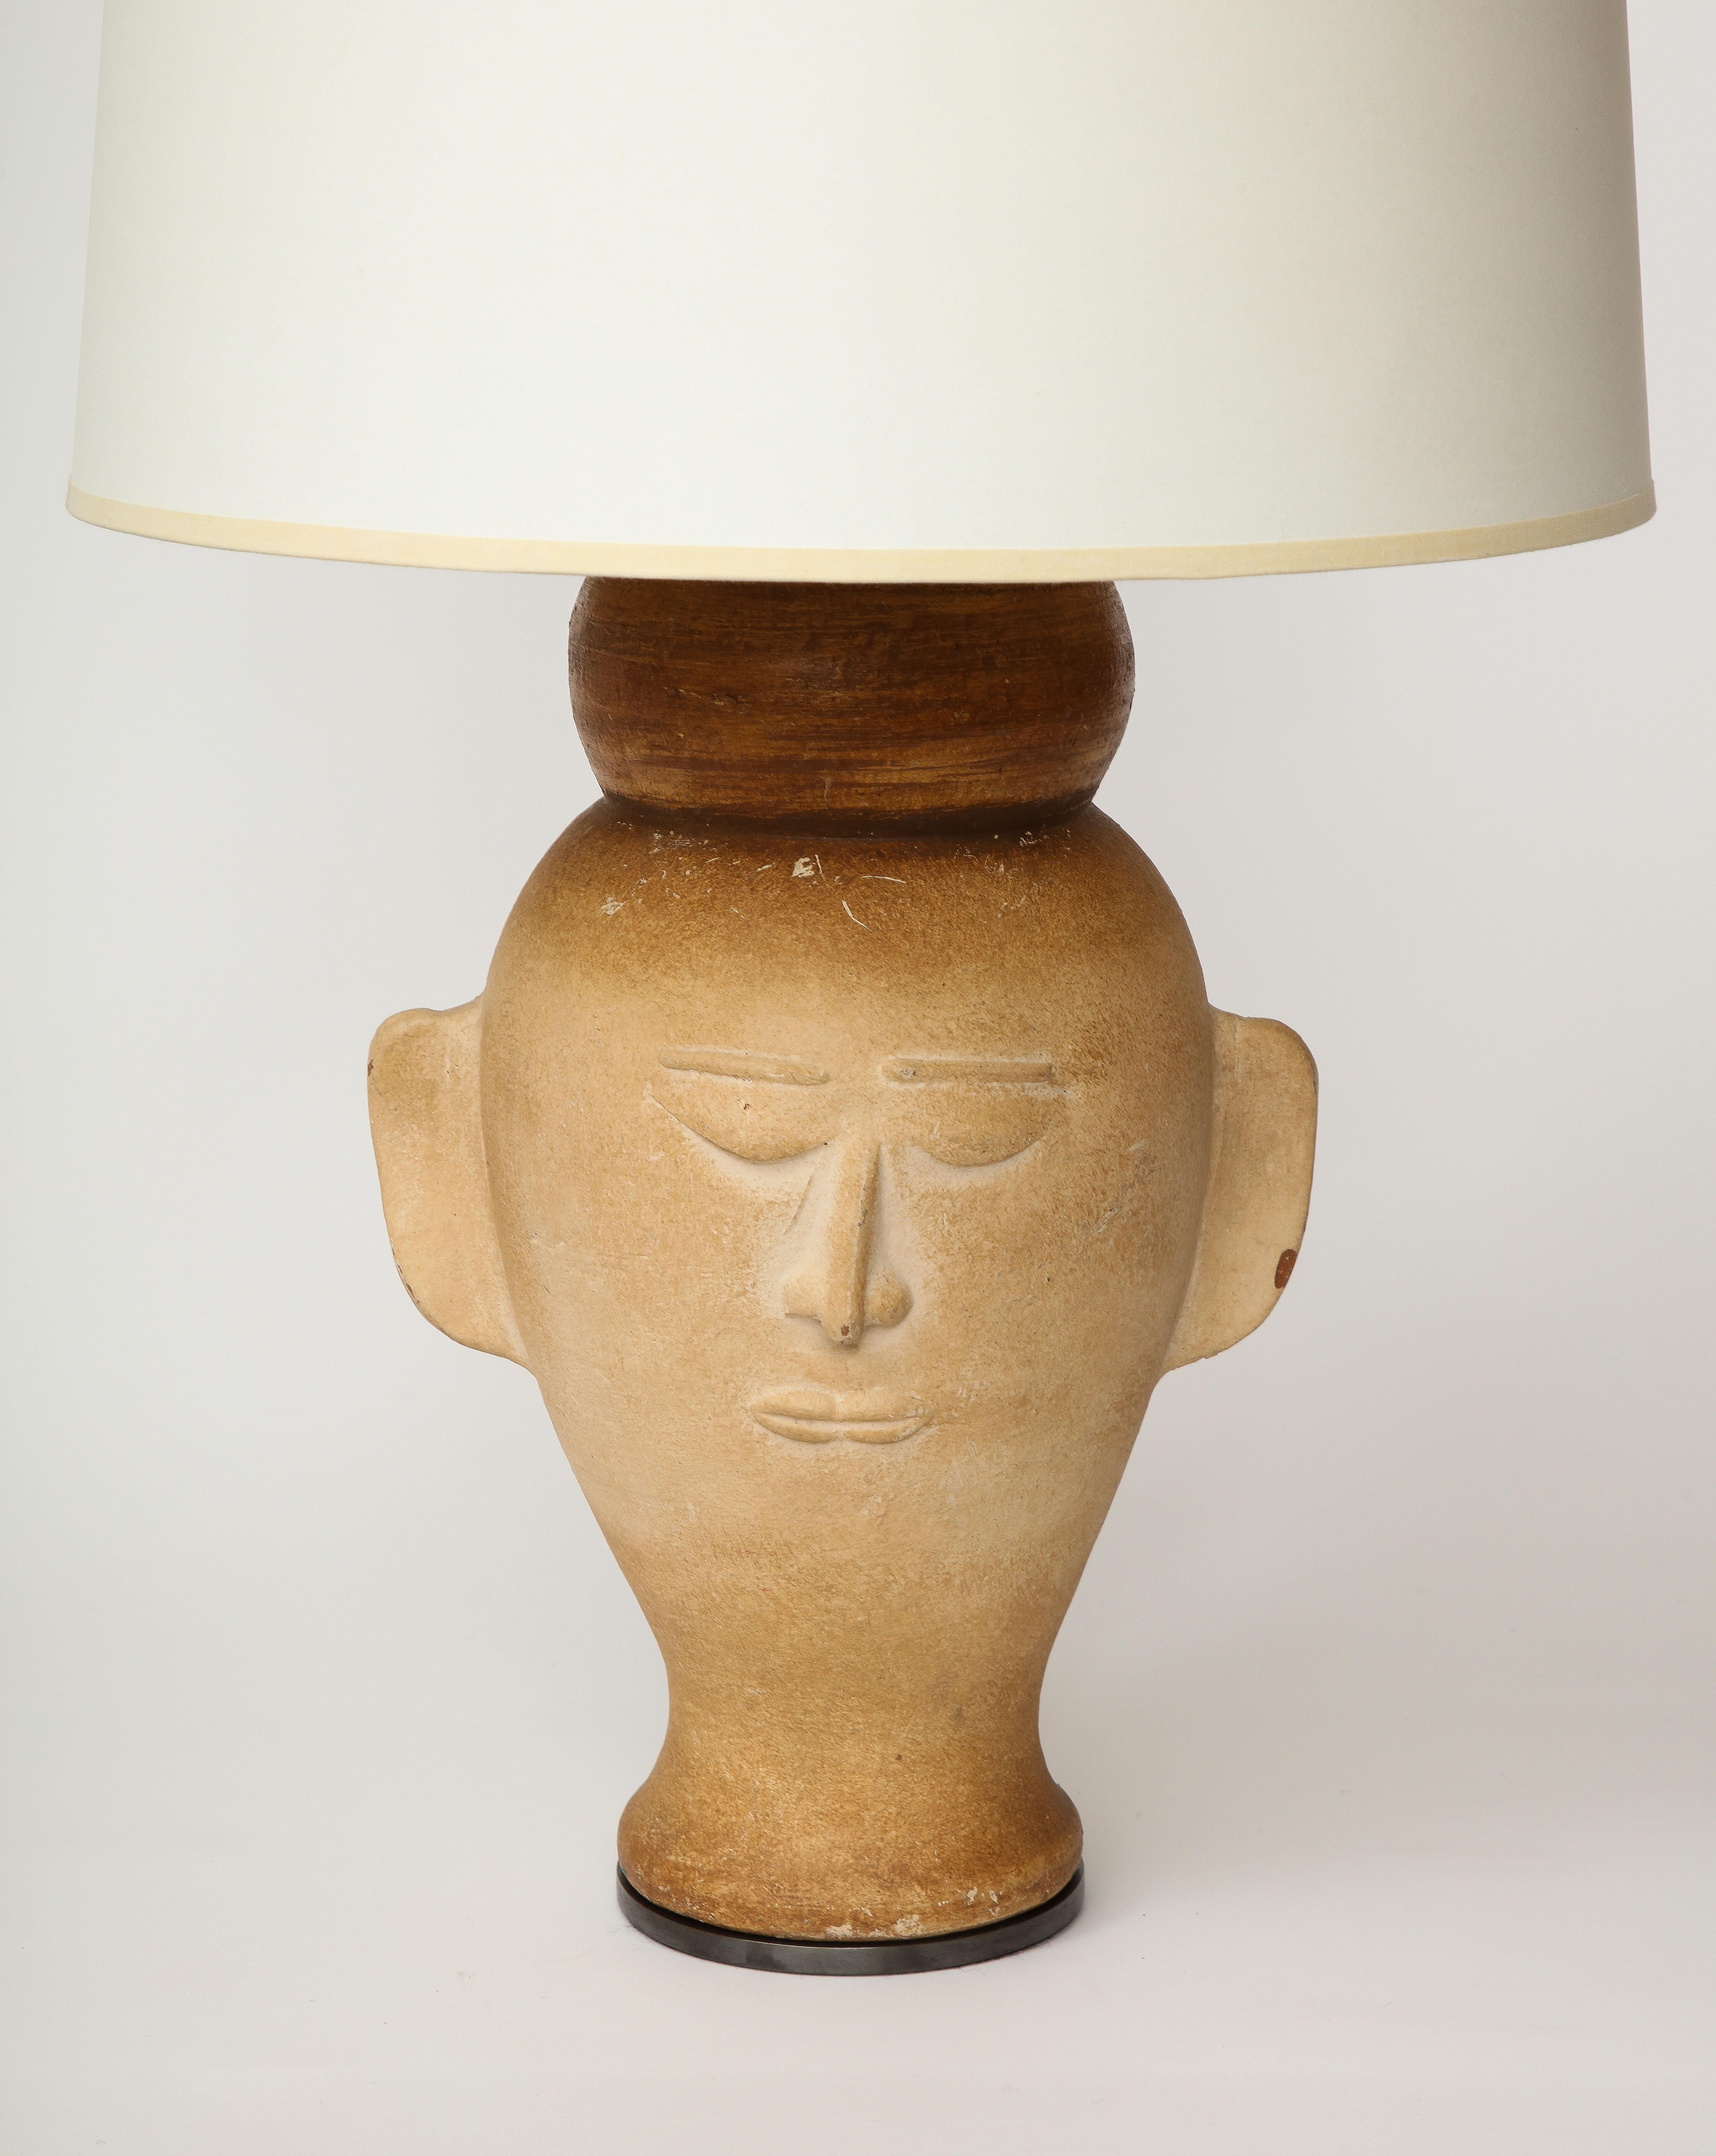 Terracotta Bust Table Lamp with Darkened Metal Base, 20th C. In Excellent Condition For Sale In New York City, NY